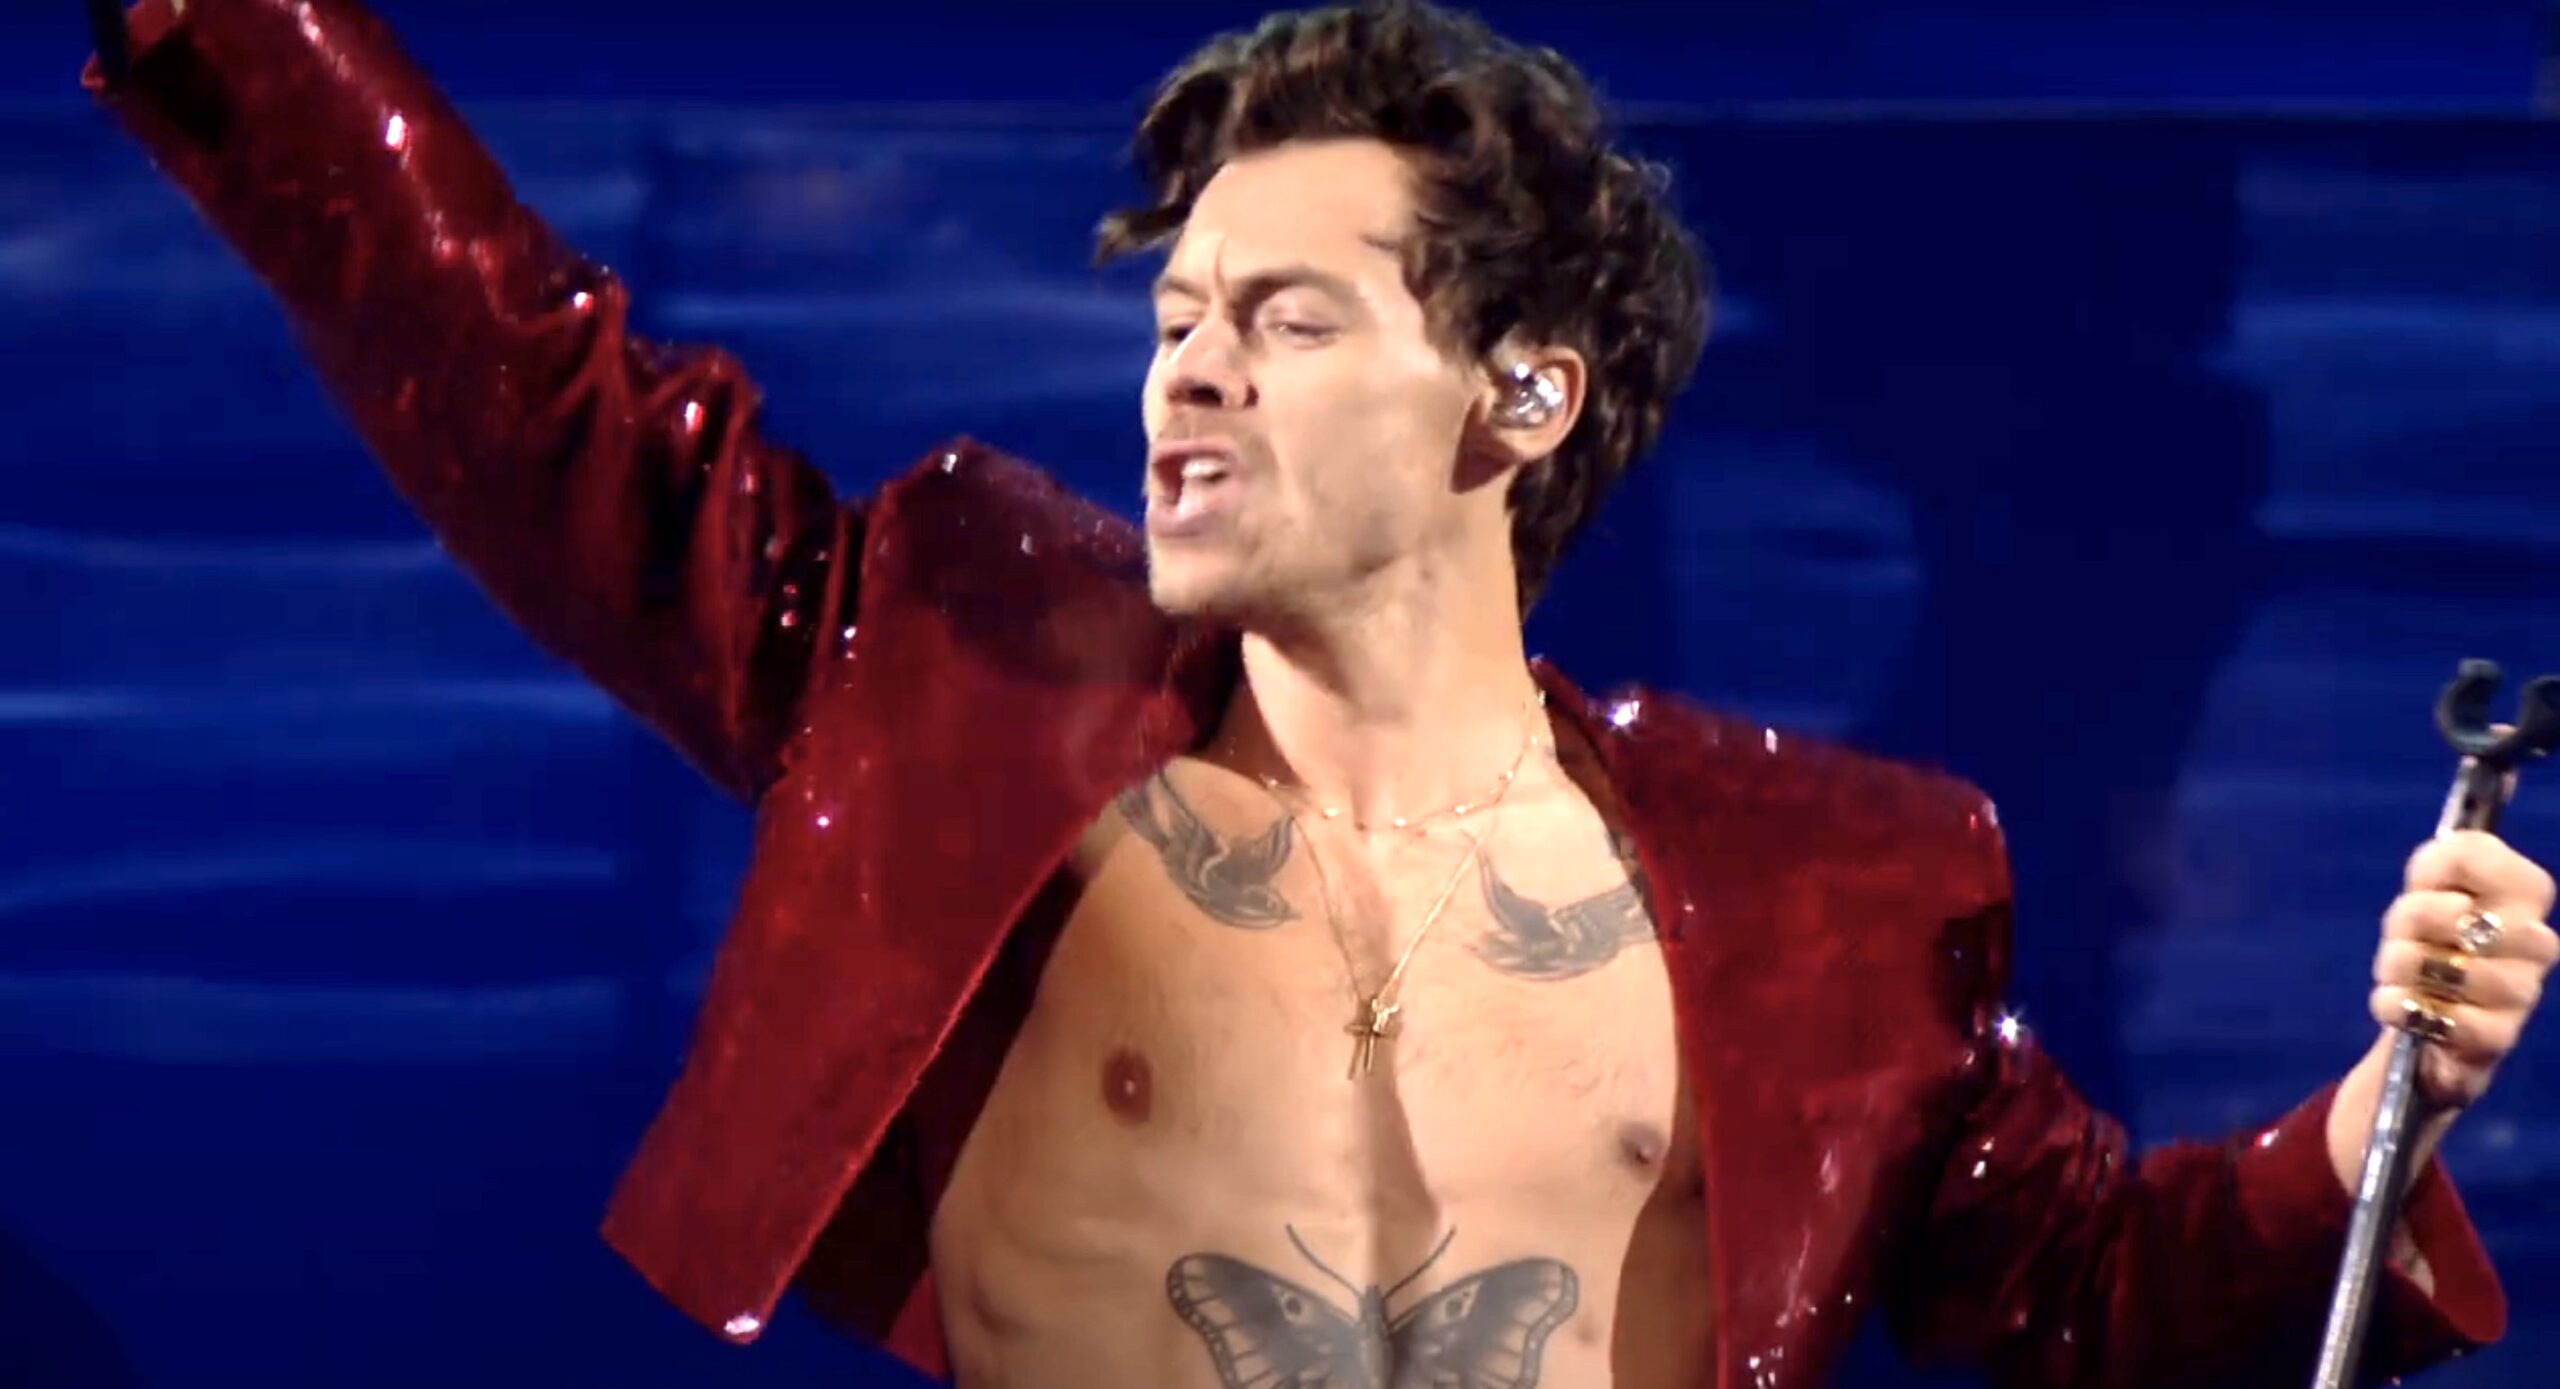 Harry Styles Rocks BRITs 2023 with ‘As It Was’ [Performance] Unmuted